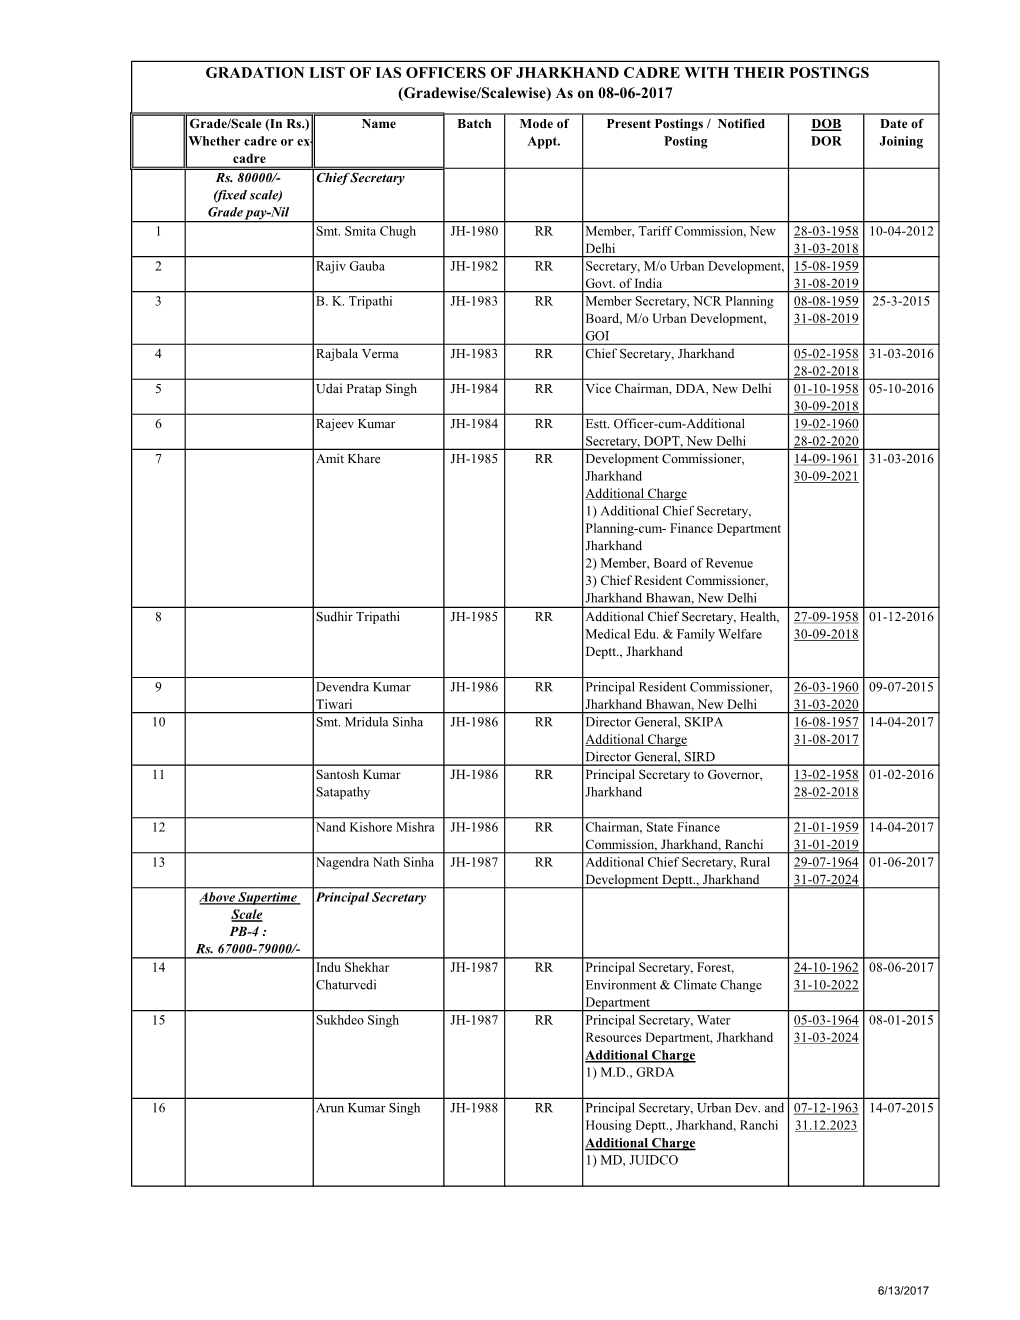 GRADATION LIST of IAS OFFICERS of JHARKHAND CADRE with THEIR POSTINGS (Gradewise/Scalewise) As on 08-06-2017